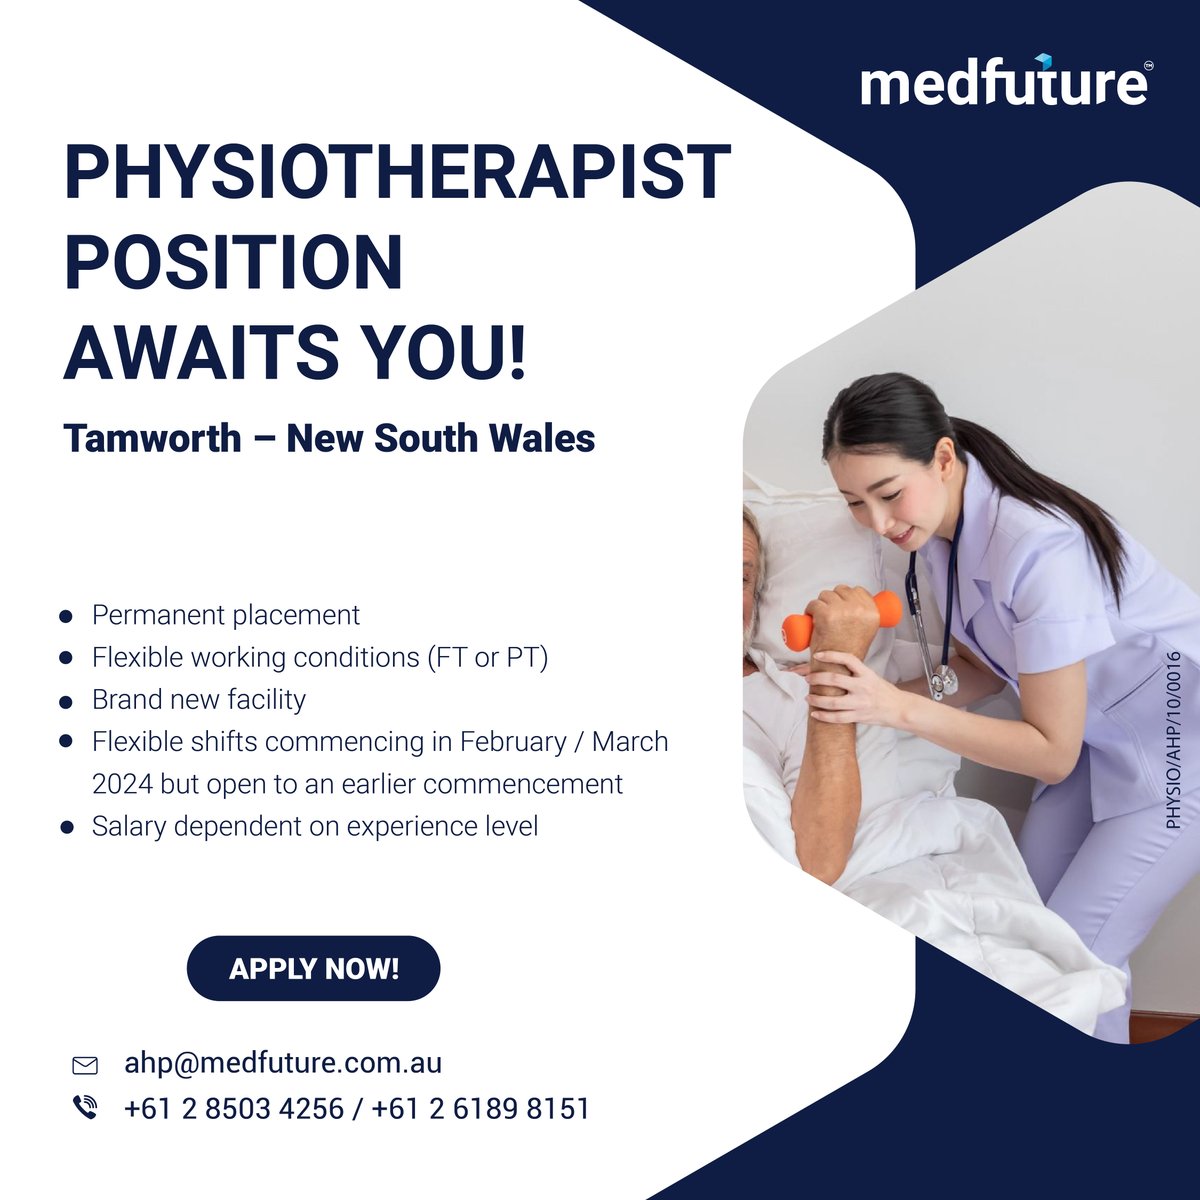 #Physiotherapist vacancies are available in #NewSouthWales. Discover the latest medical and healthcare professional job vacancies found in Australia & New Zealand when you subscribe with #Medfuture.

Apply Link - medfuture.com.au/job/permanent

#PhysiotherapistJobs #NSWJobs #MedJobs